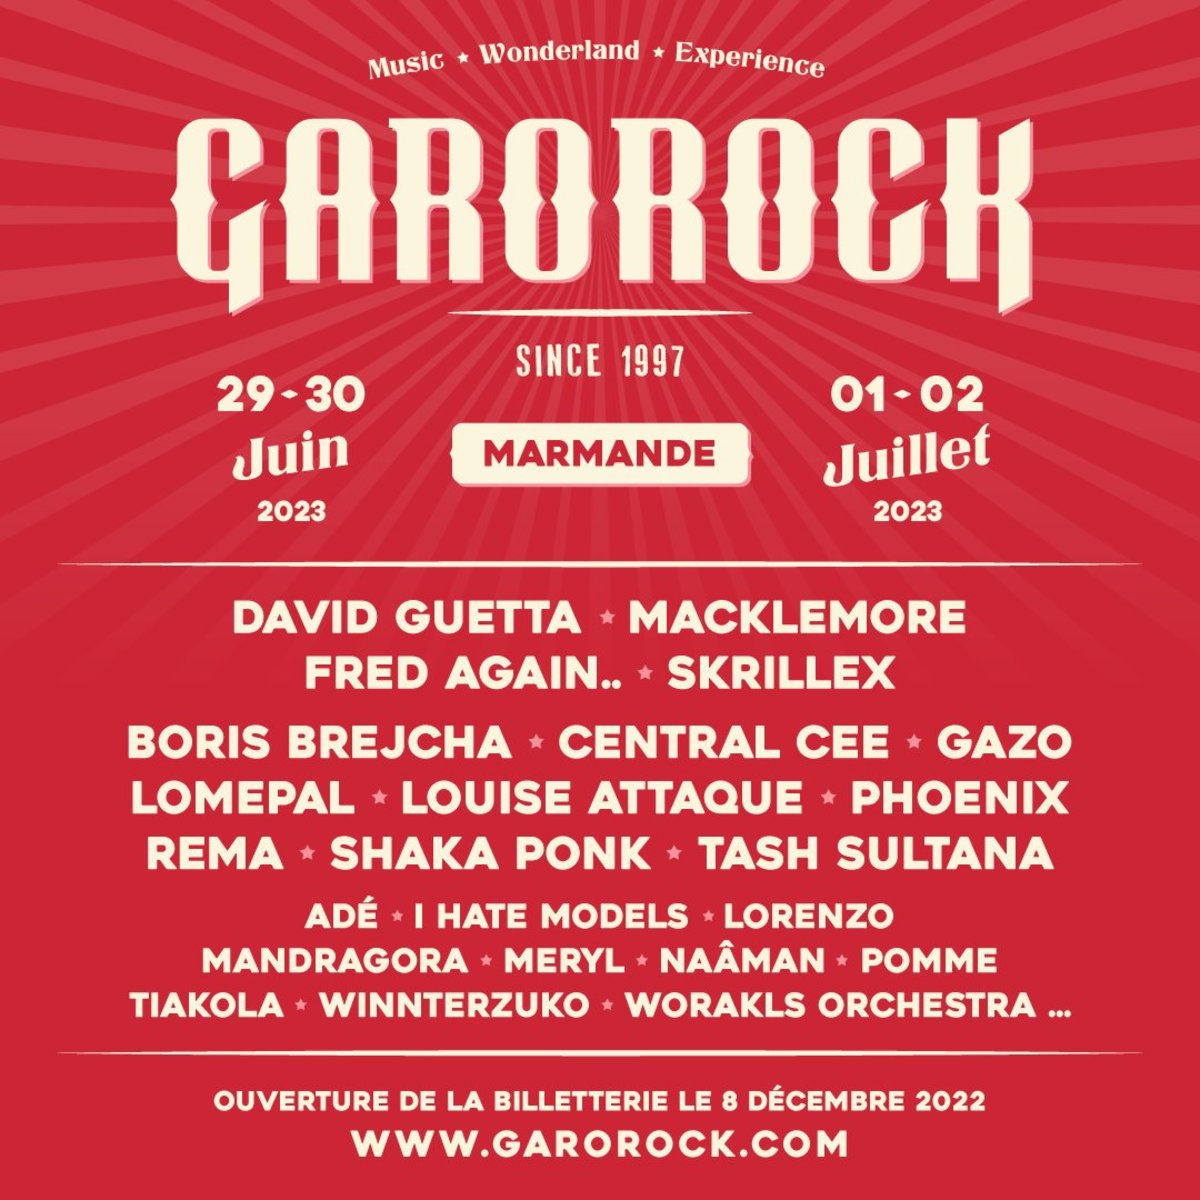 Garorock Festival 2023 to Feature Skrillex, Fred again.. and More   - The Latest Electronic Dance Music News, Reviews & Artists